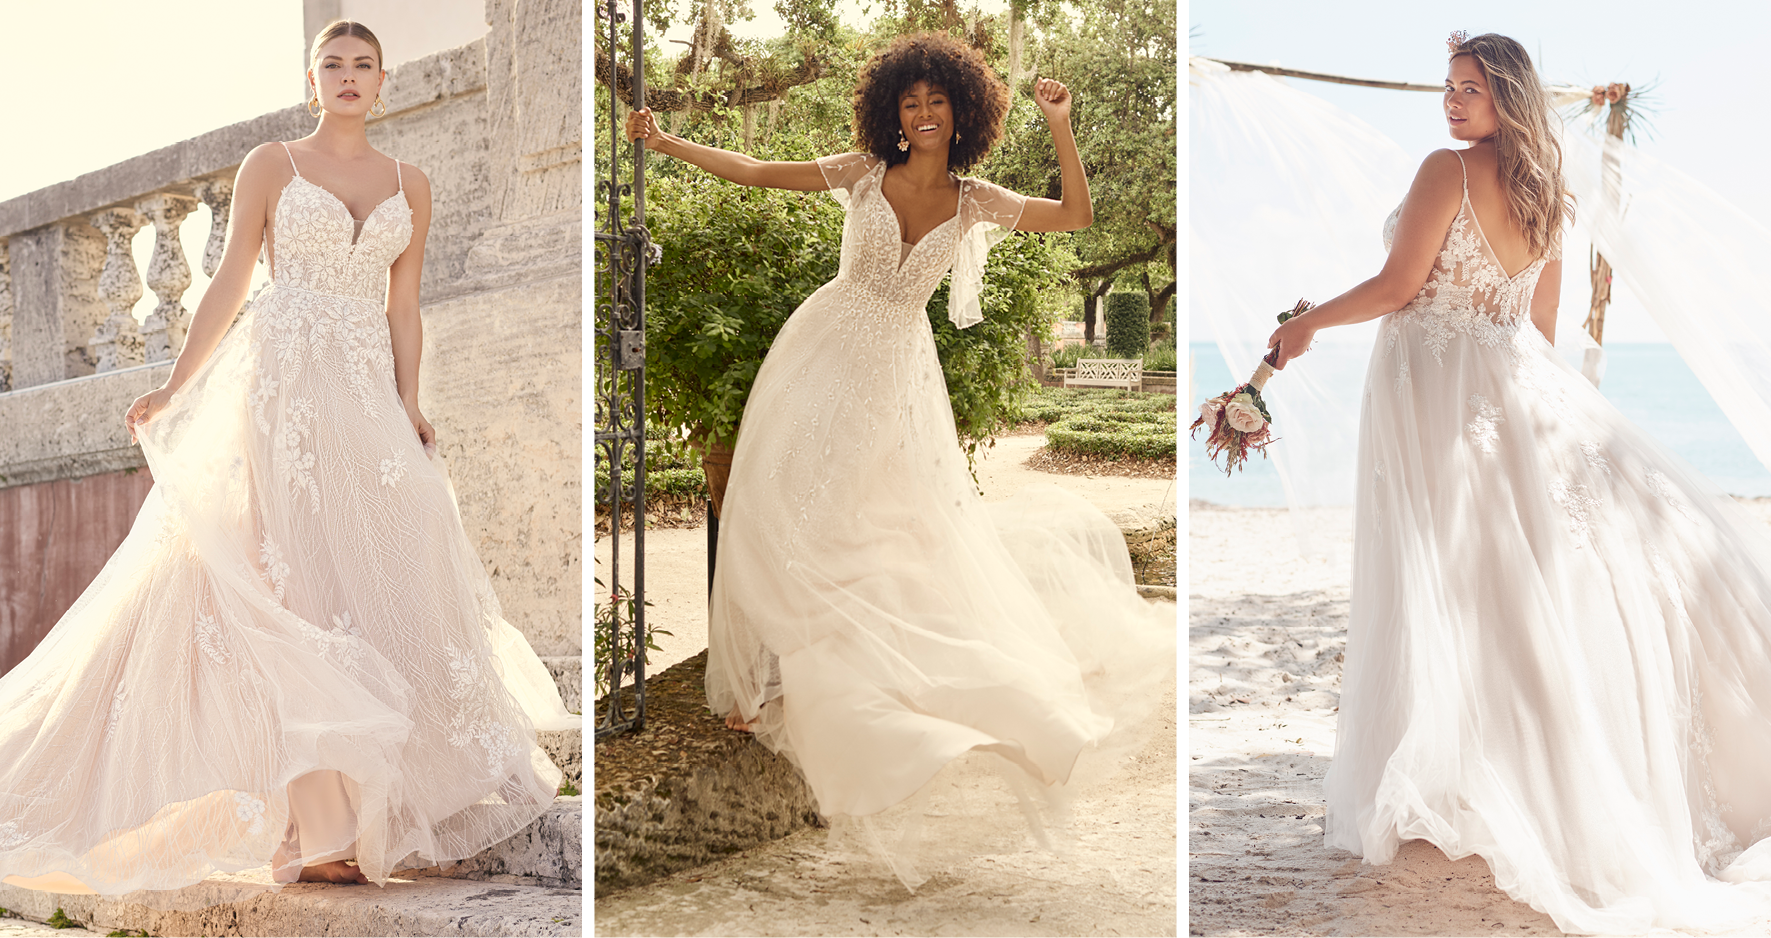 Collage of Brides Wearing Lightweight A-line Wedding Dresses by Maggie Sottero for Pear-Shaped Body Types